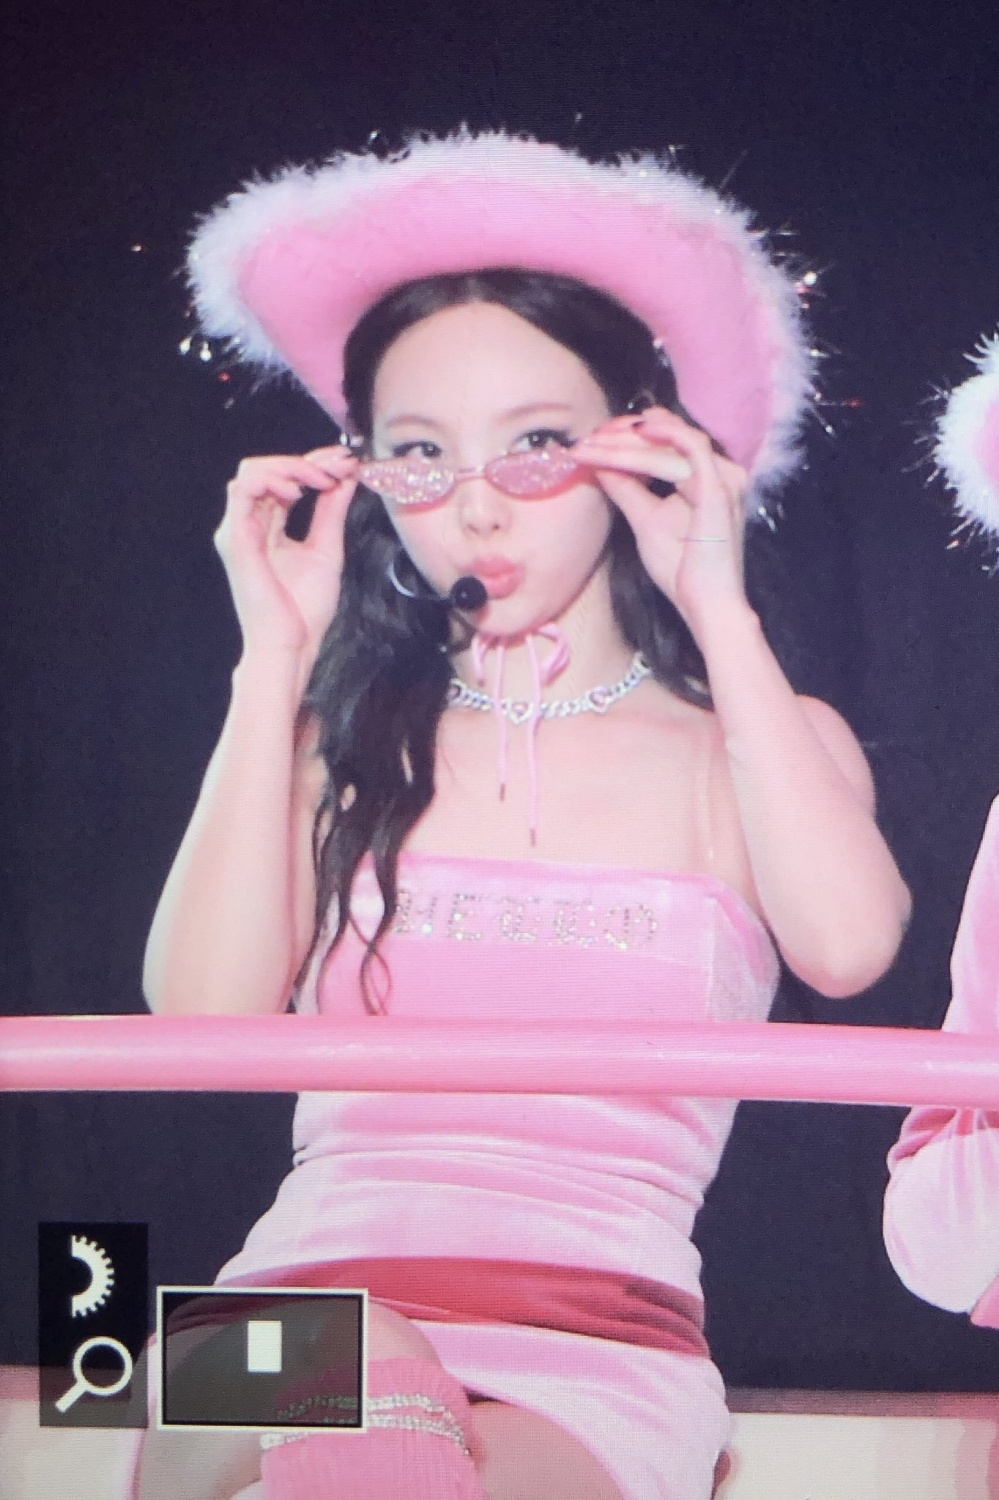 Nayeon Kpop Idol Clothes Women Concert Outfits Stage Performance